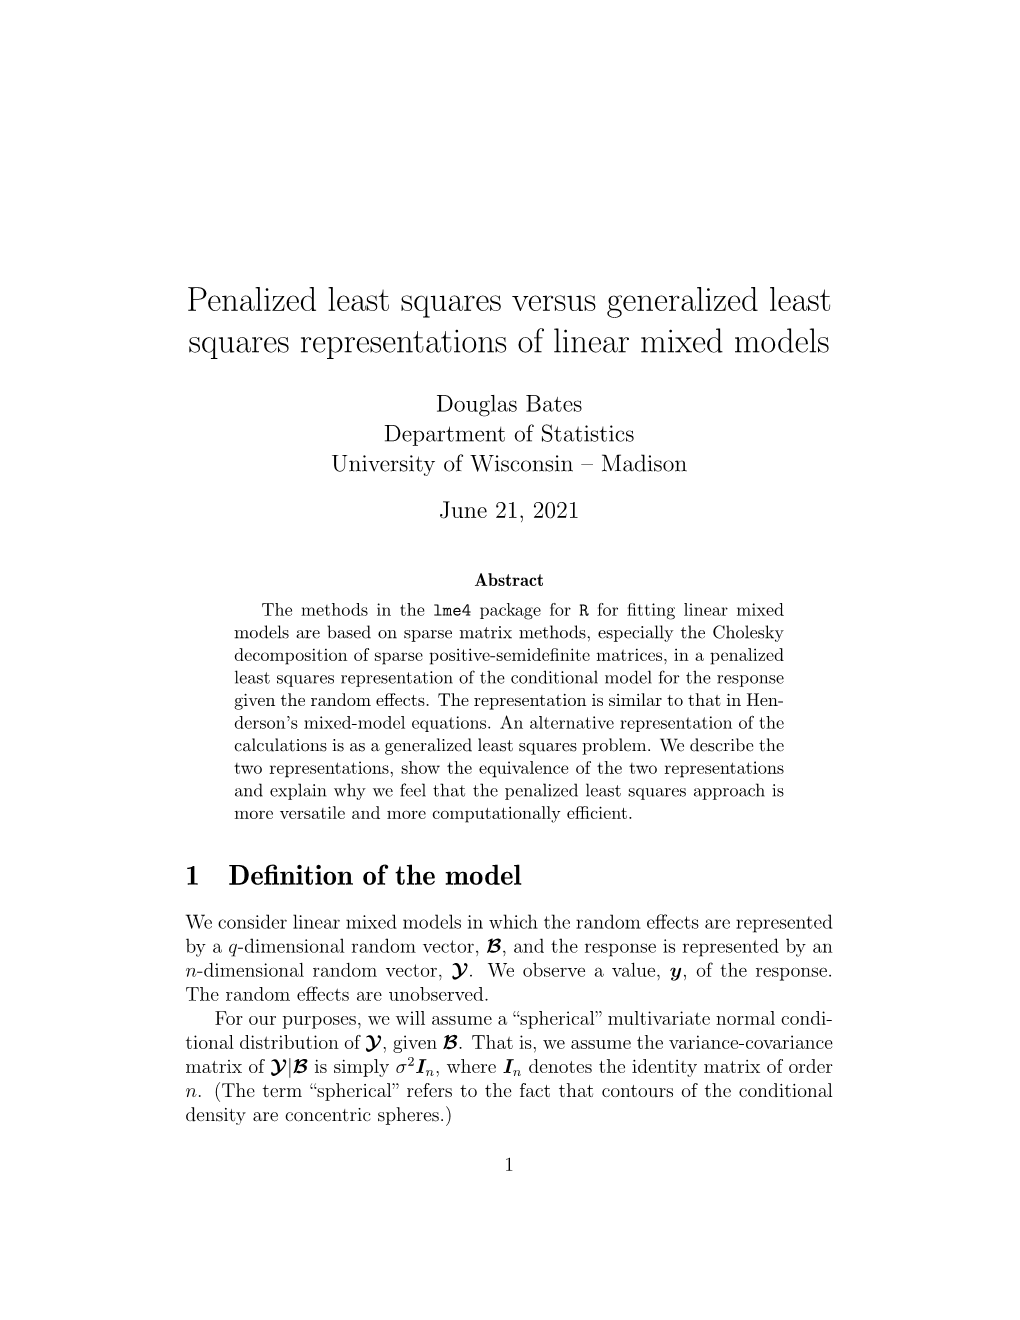 Penalized Least Squares Versus Generalized Least Squares Representations of Linear Mixed Models